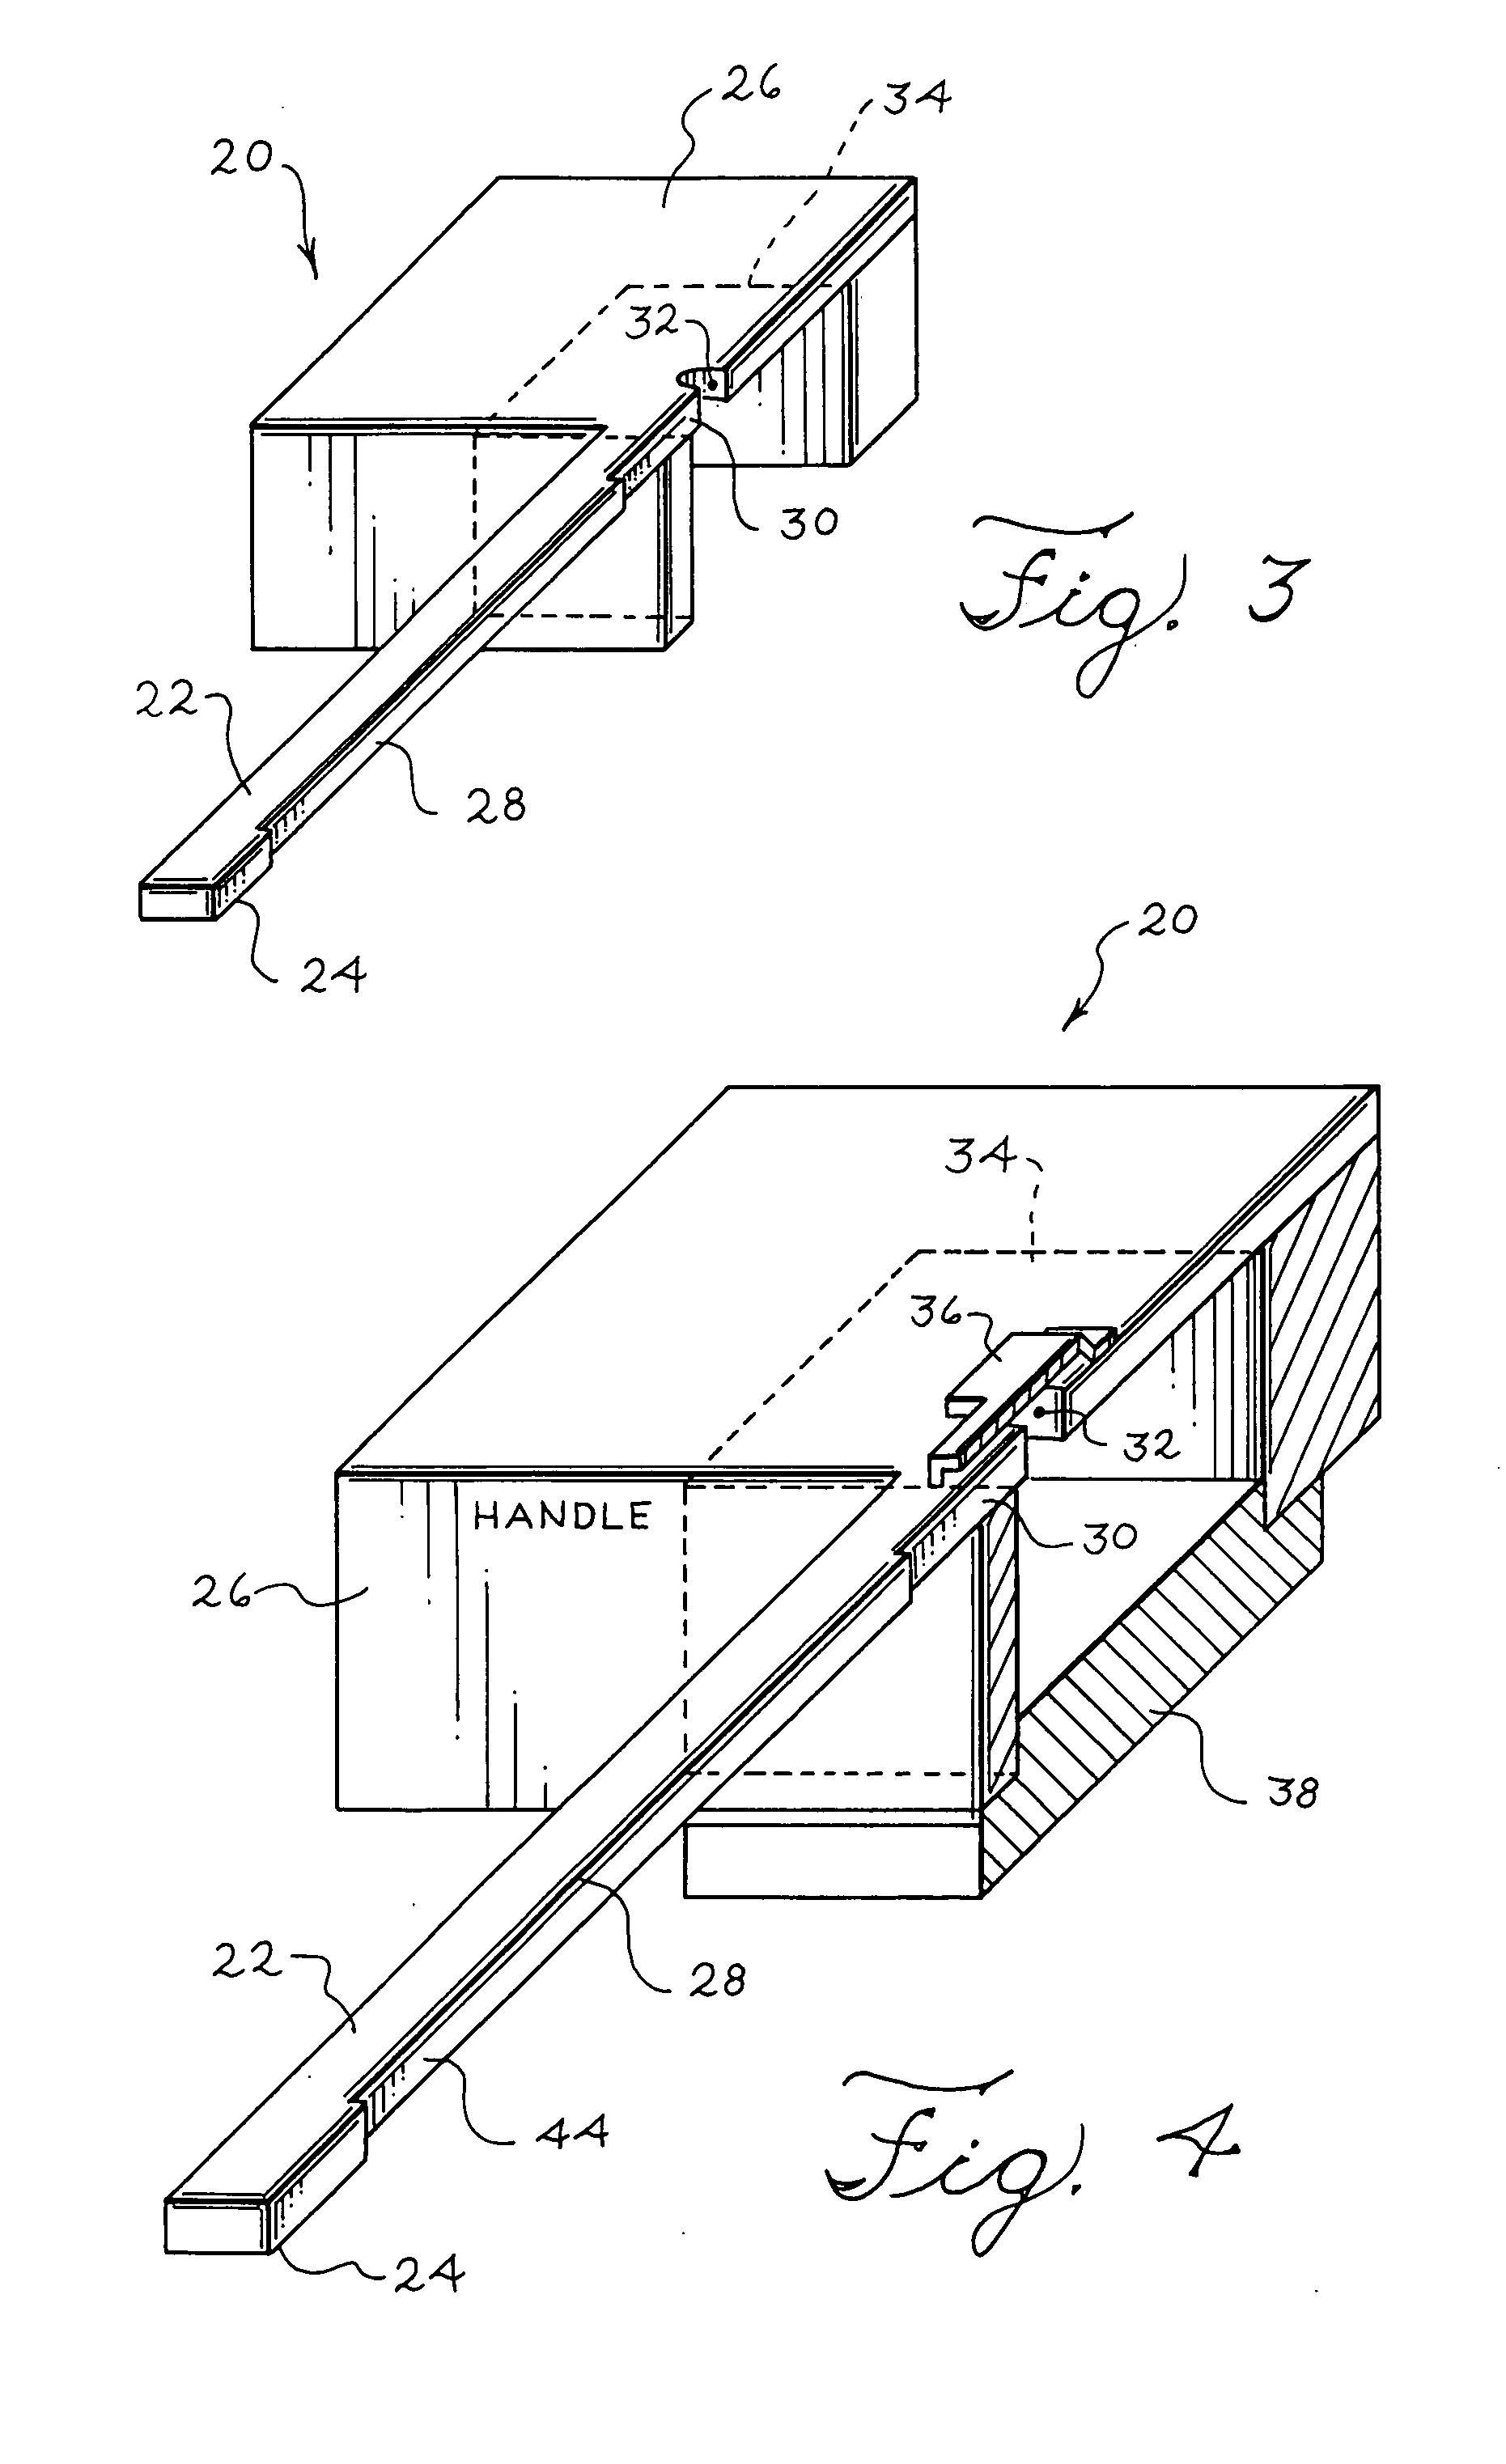 Scanning probe microscope probe with integrated capillary channel